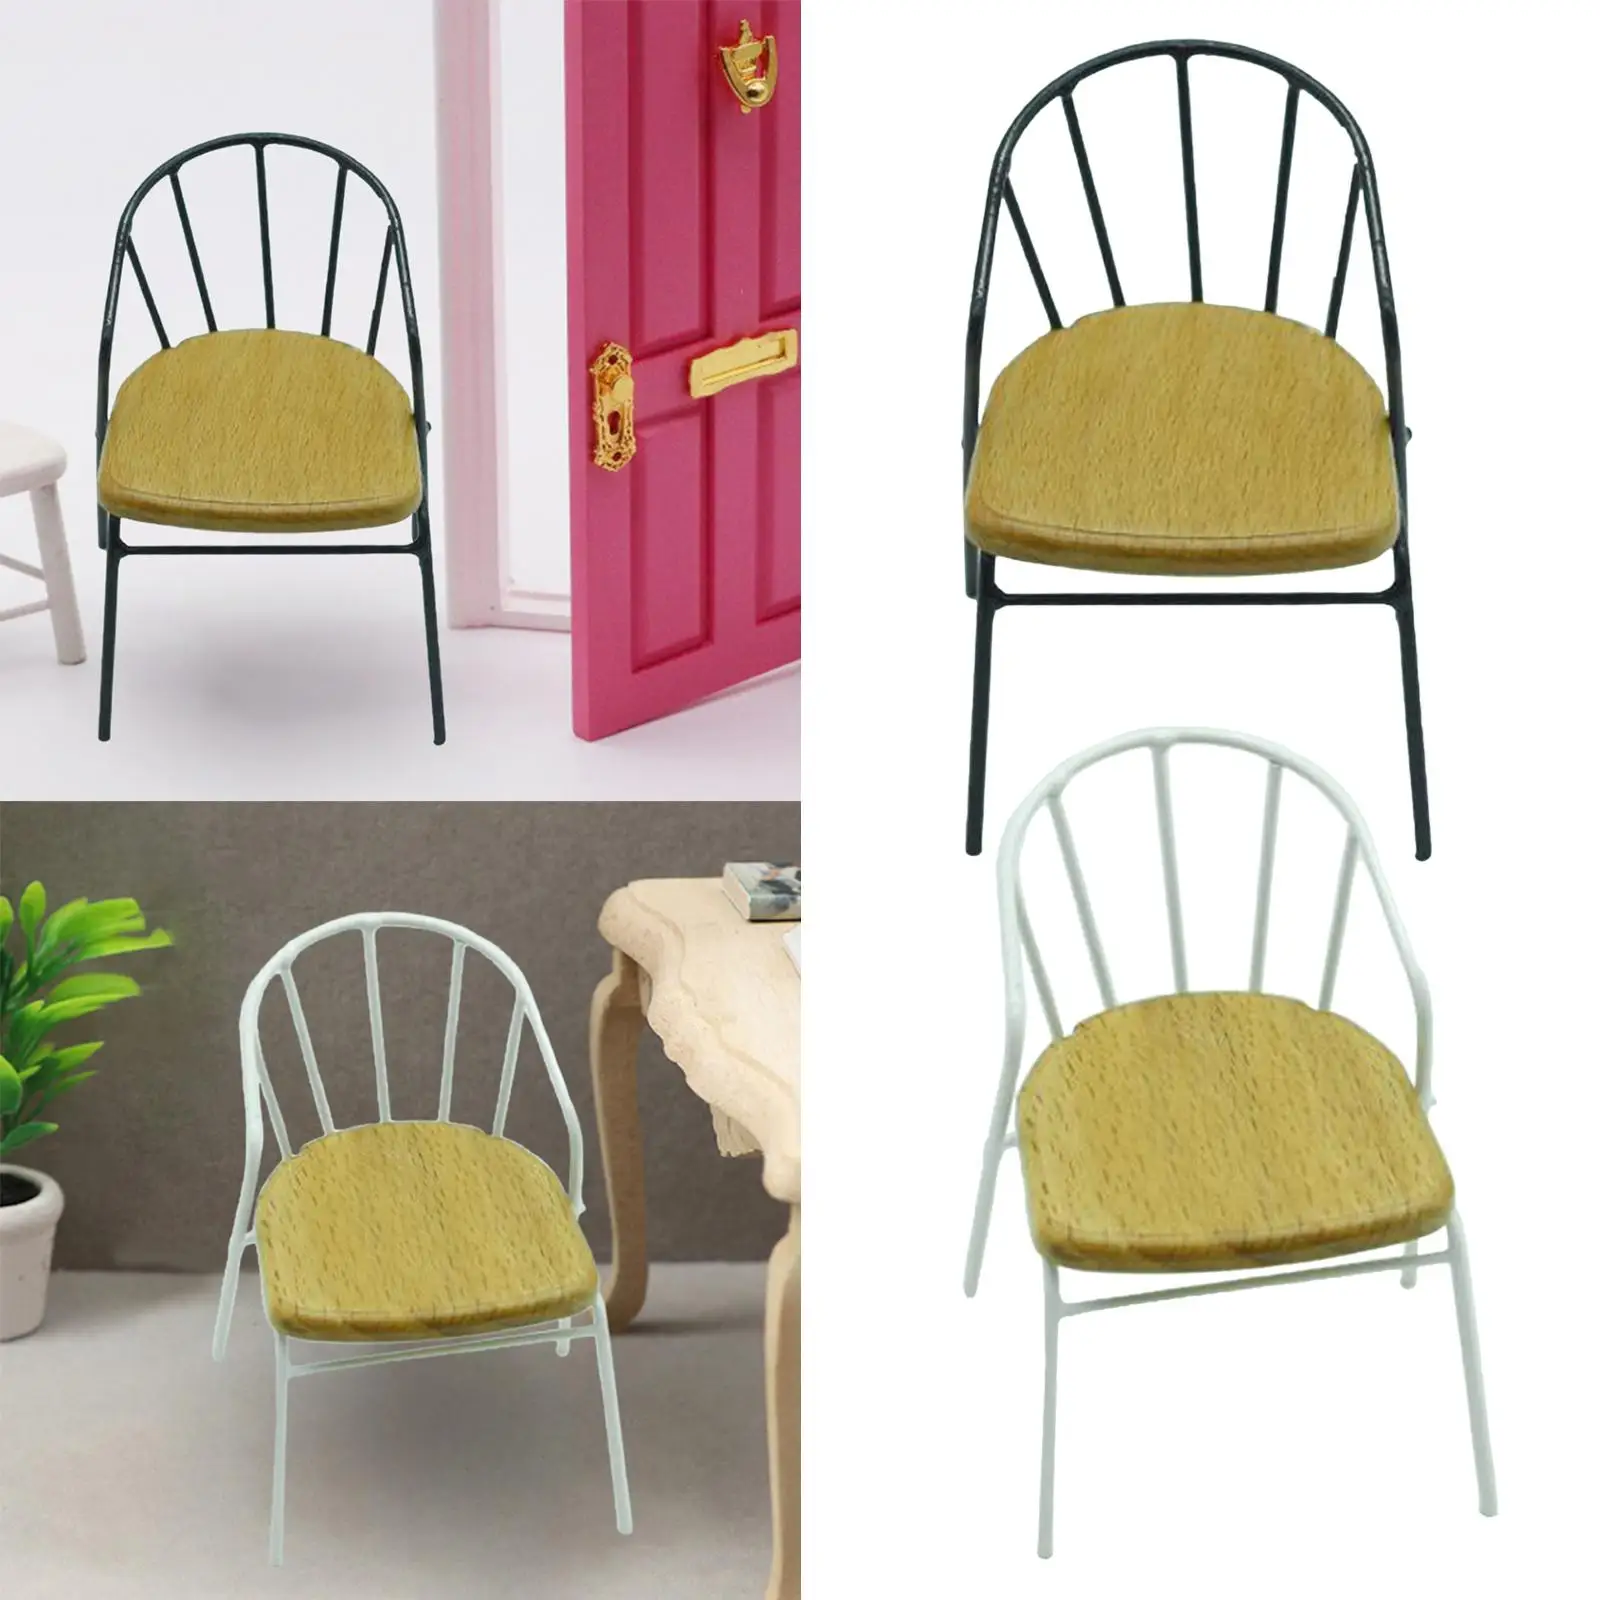 Dollhouse Miniature Back Side Chair Tiny Chair Model 1/12 Dollhouse Chairs for Furniture Diorama Kitchen Decoration Accessories